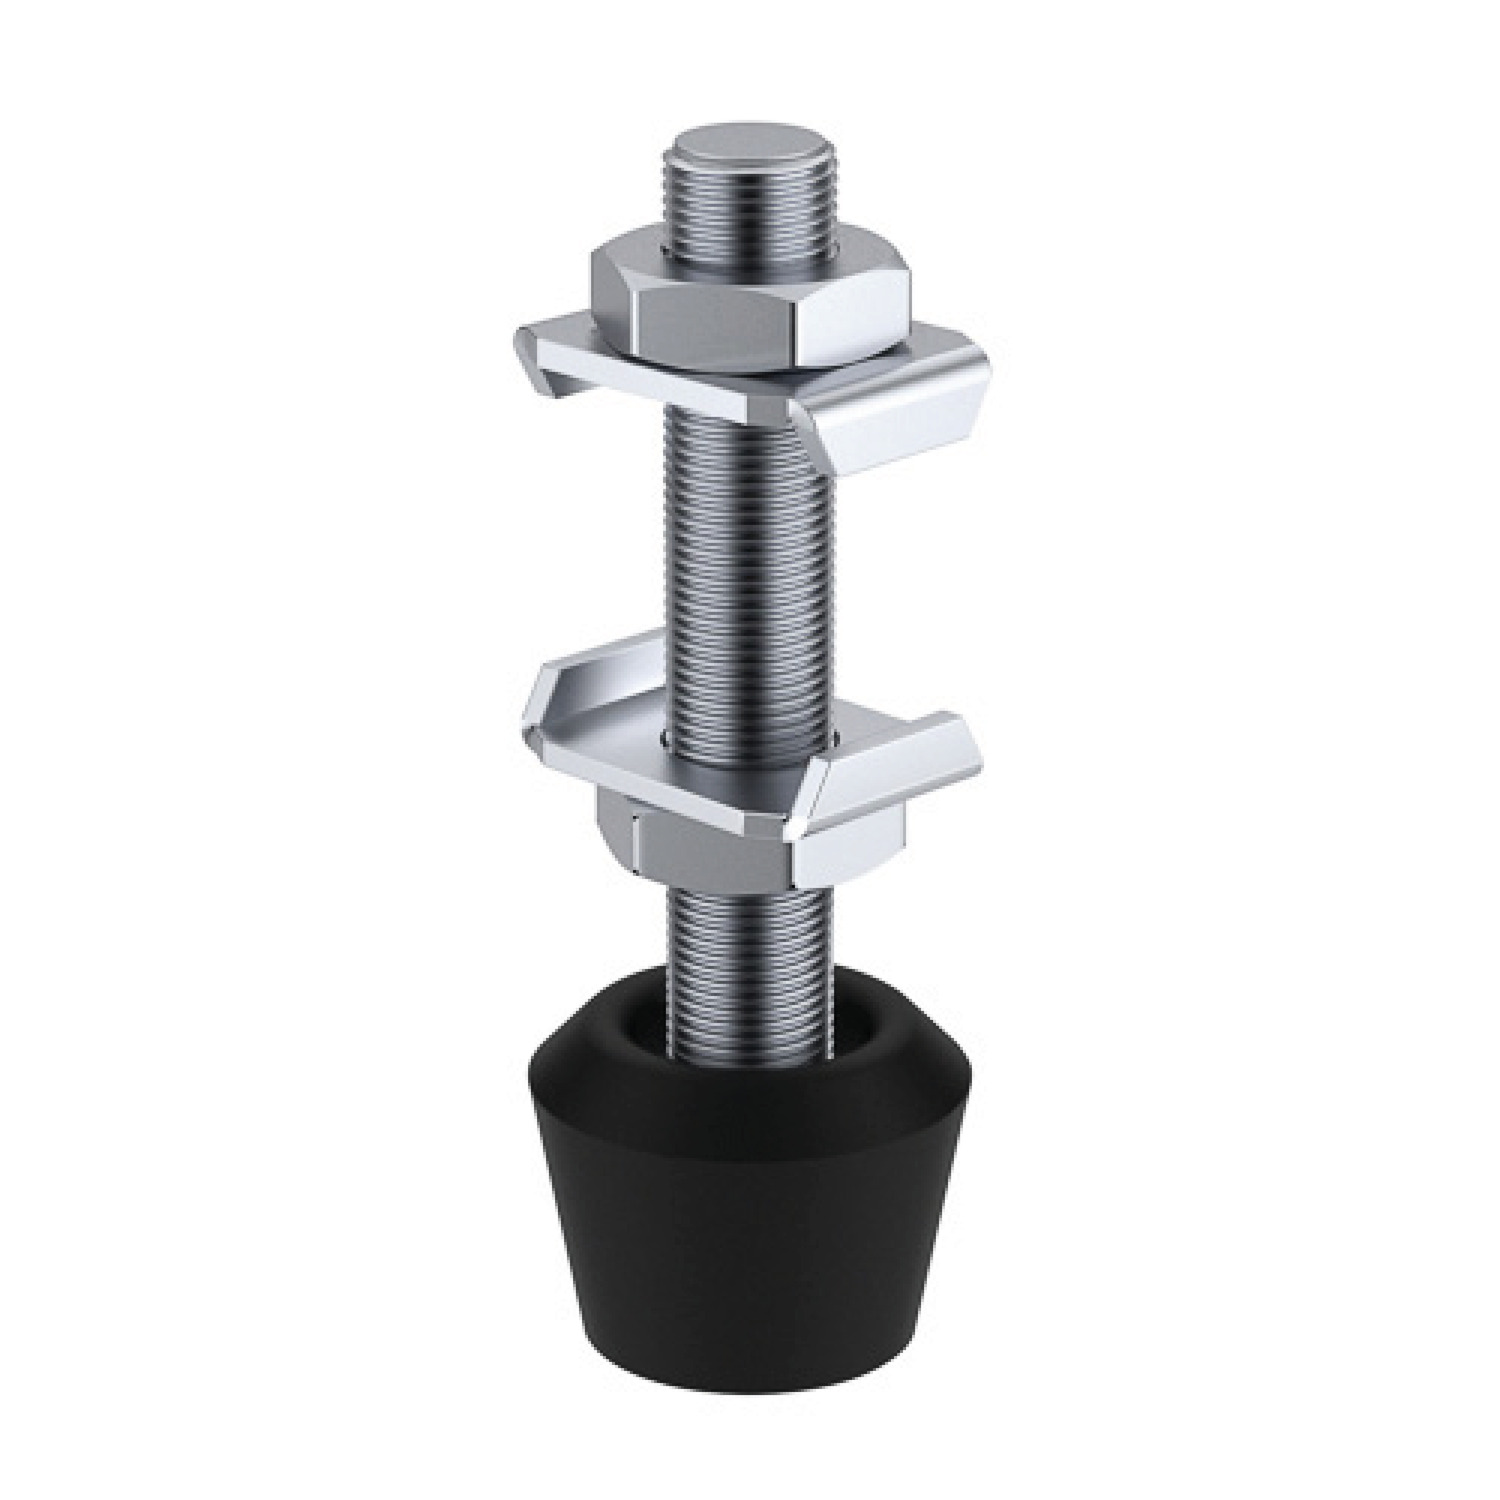 Product 45062.1, Clamping Screws for horizontal acting toggle clamp / 